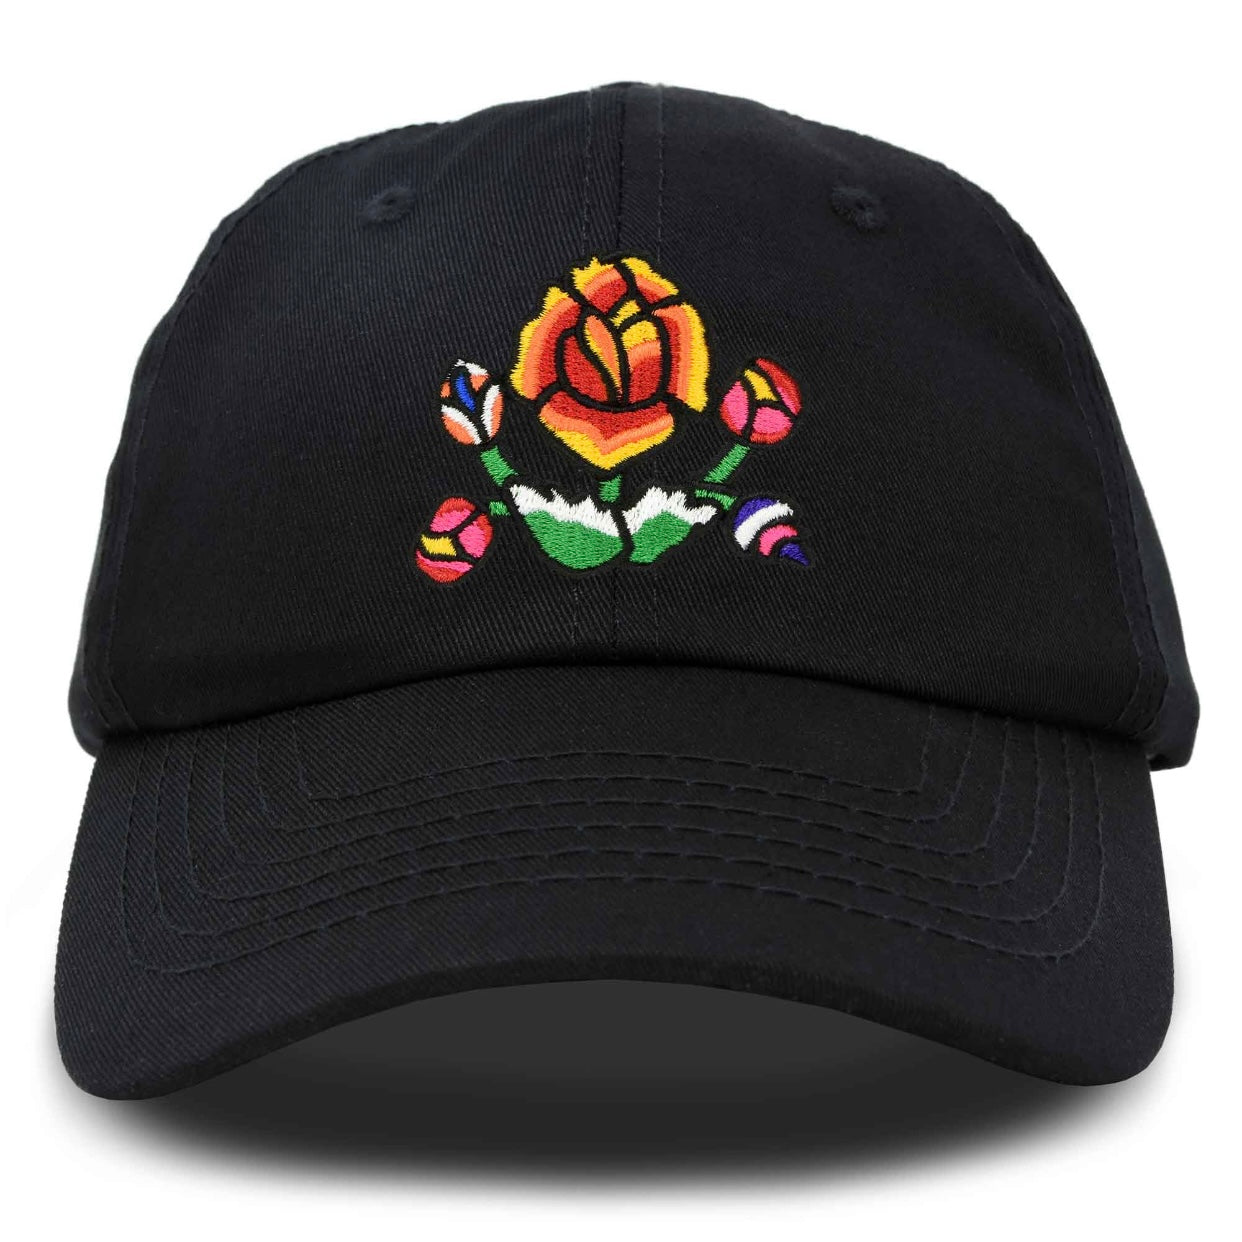 Colorful floral embroidered cap in black.